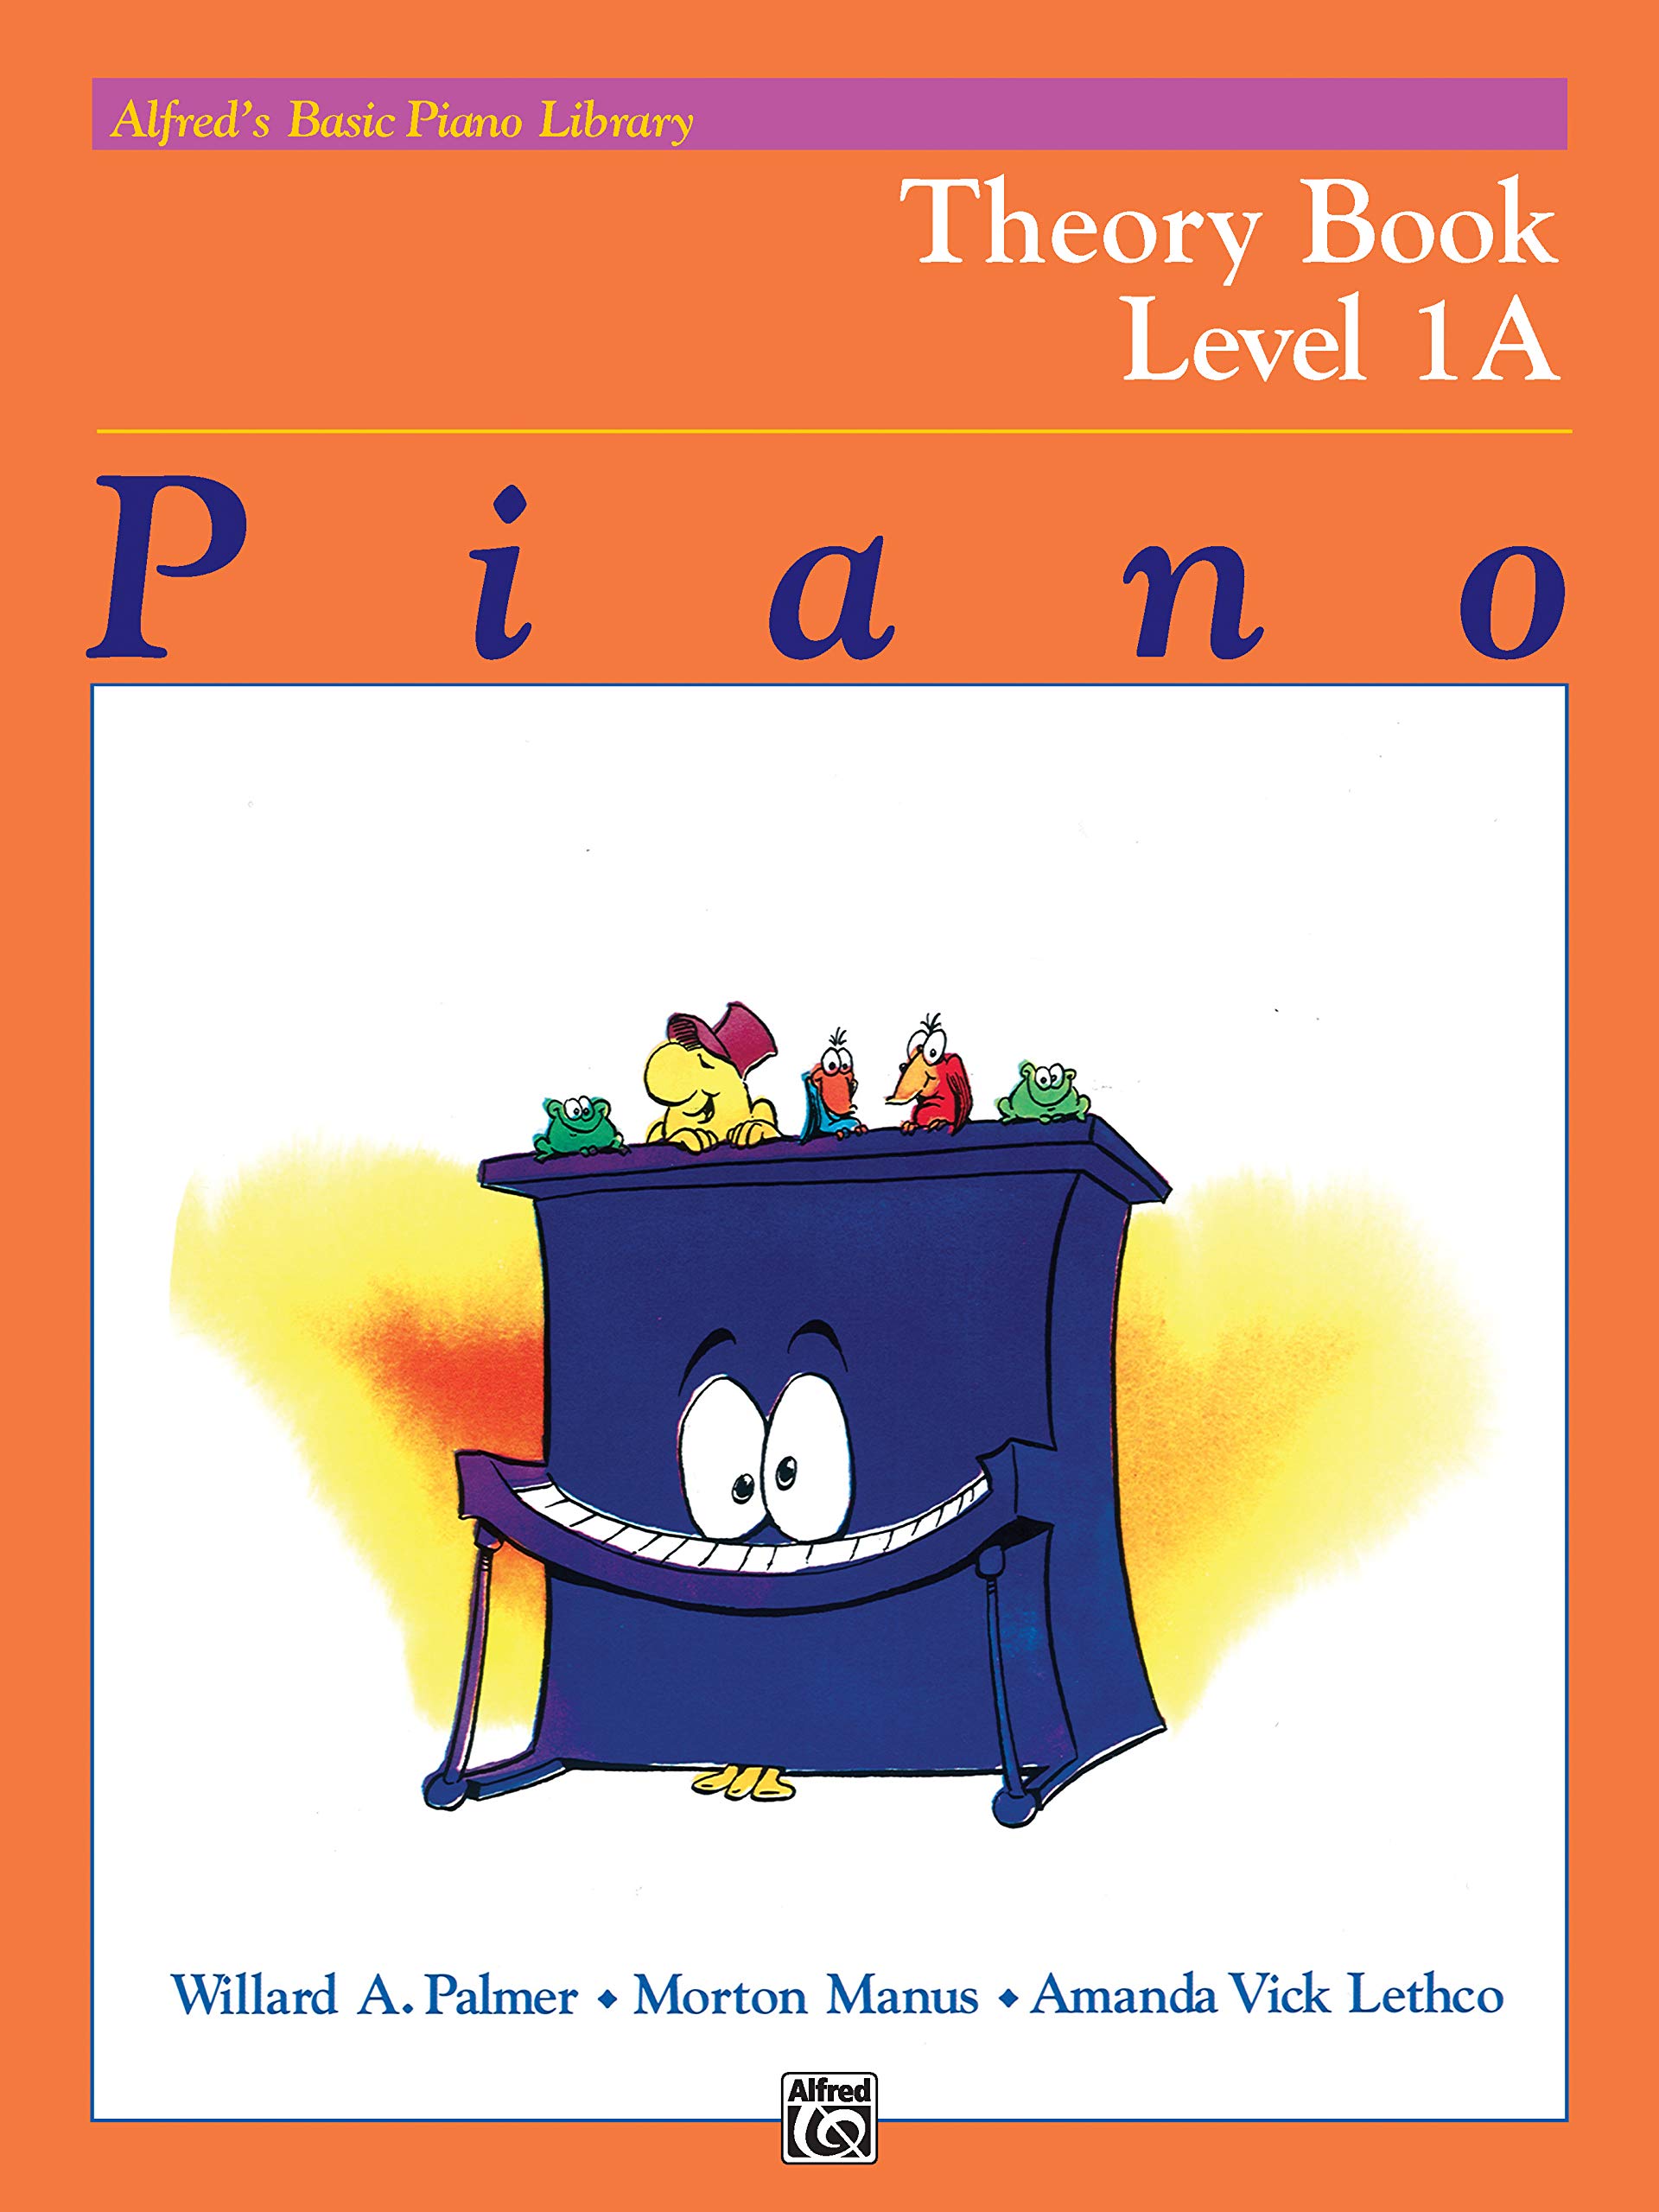 Alfred's Basic Piano Library Theory, Bk 1A (Alfred's Basic Piano Library, Bk 1A)